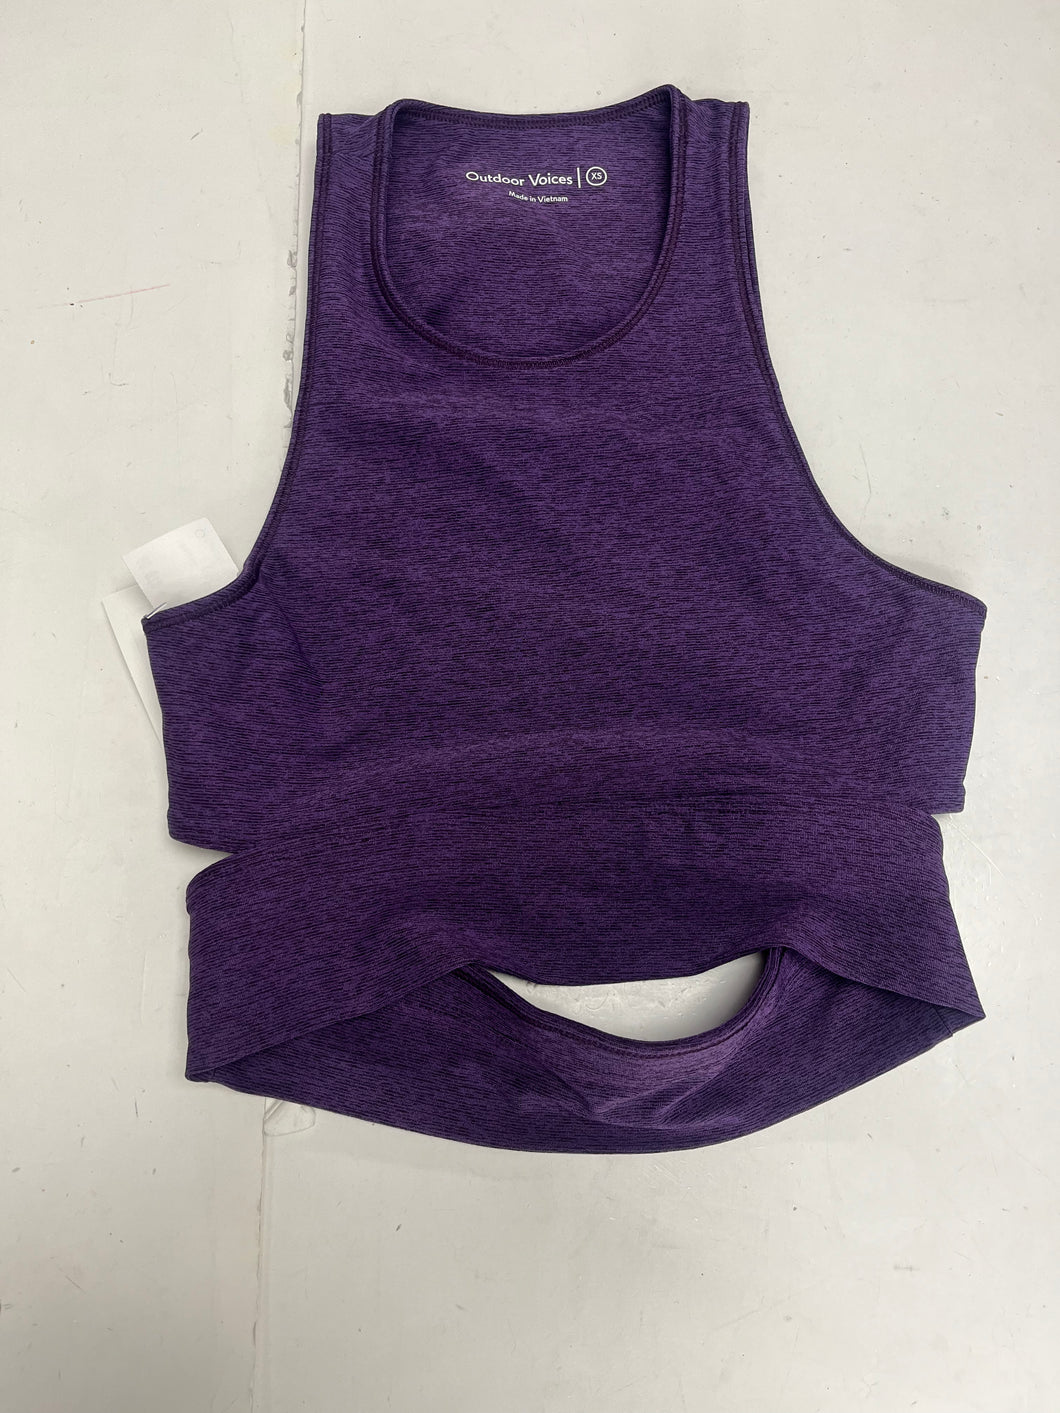 Outdoor Voices Athletic Top Size Extra Small